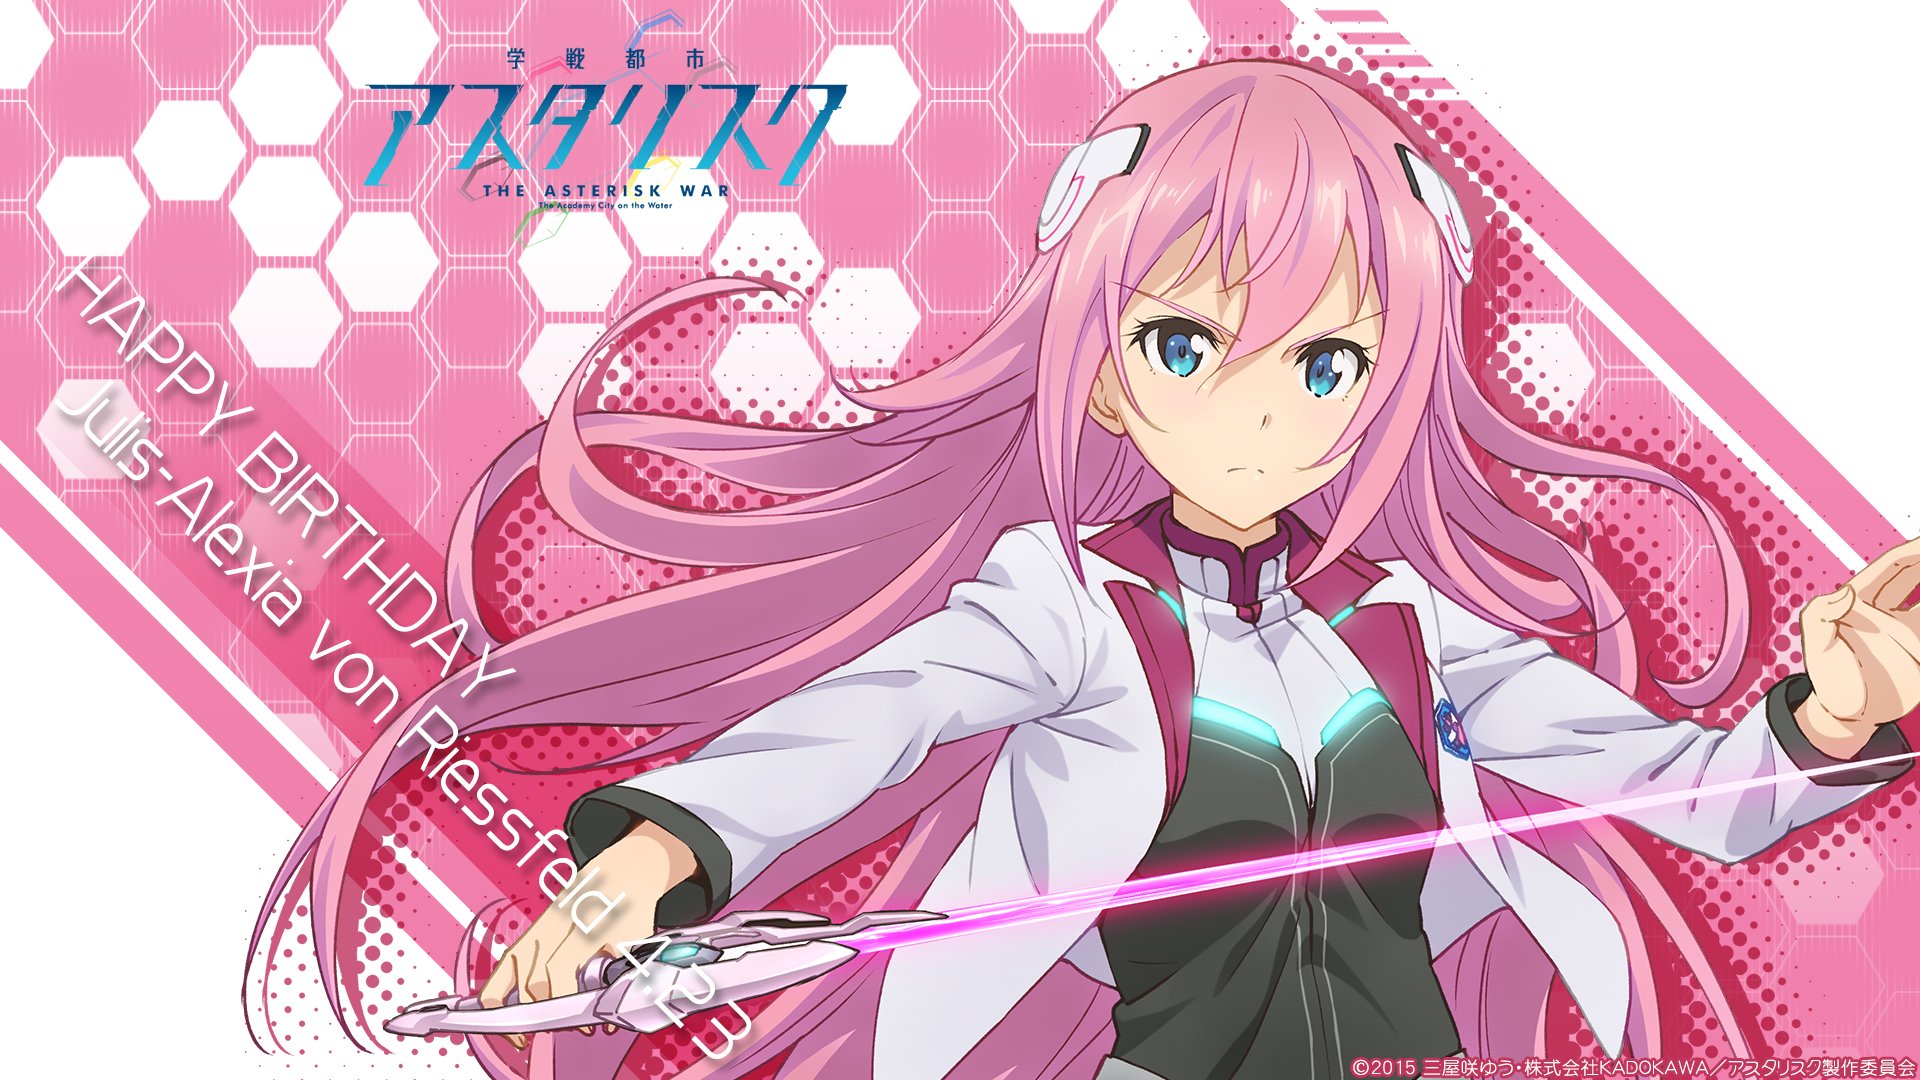 The Asterisk War: The Academy City On The Water #6